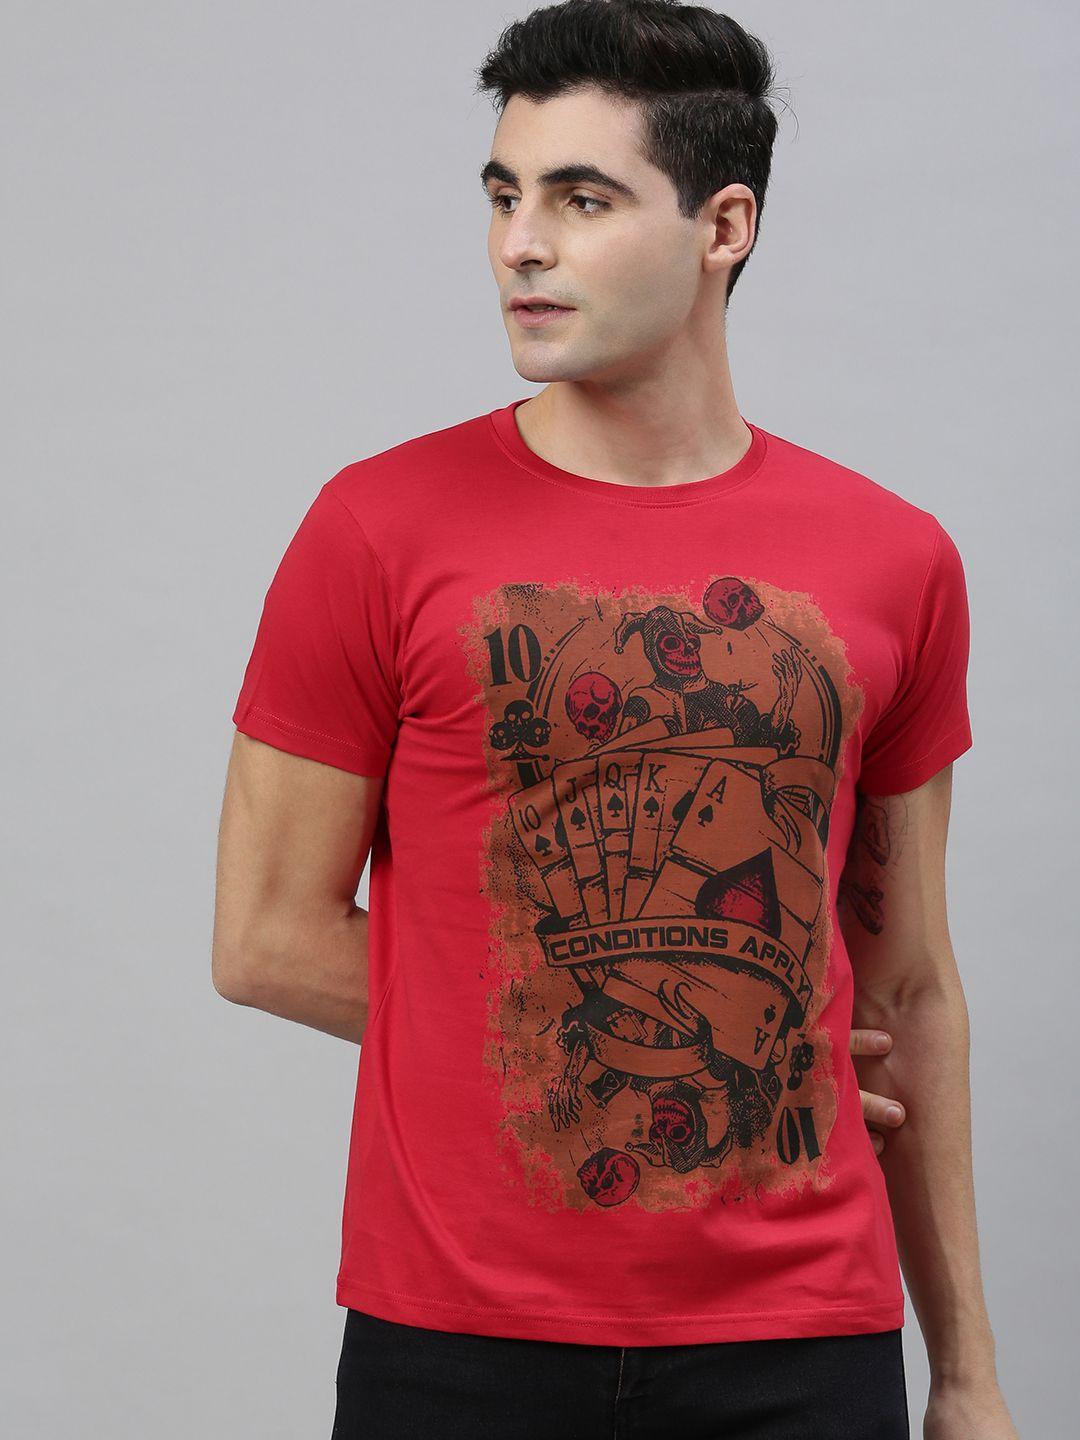 conditions apply men red printed round neck pure cotton t-shirt